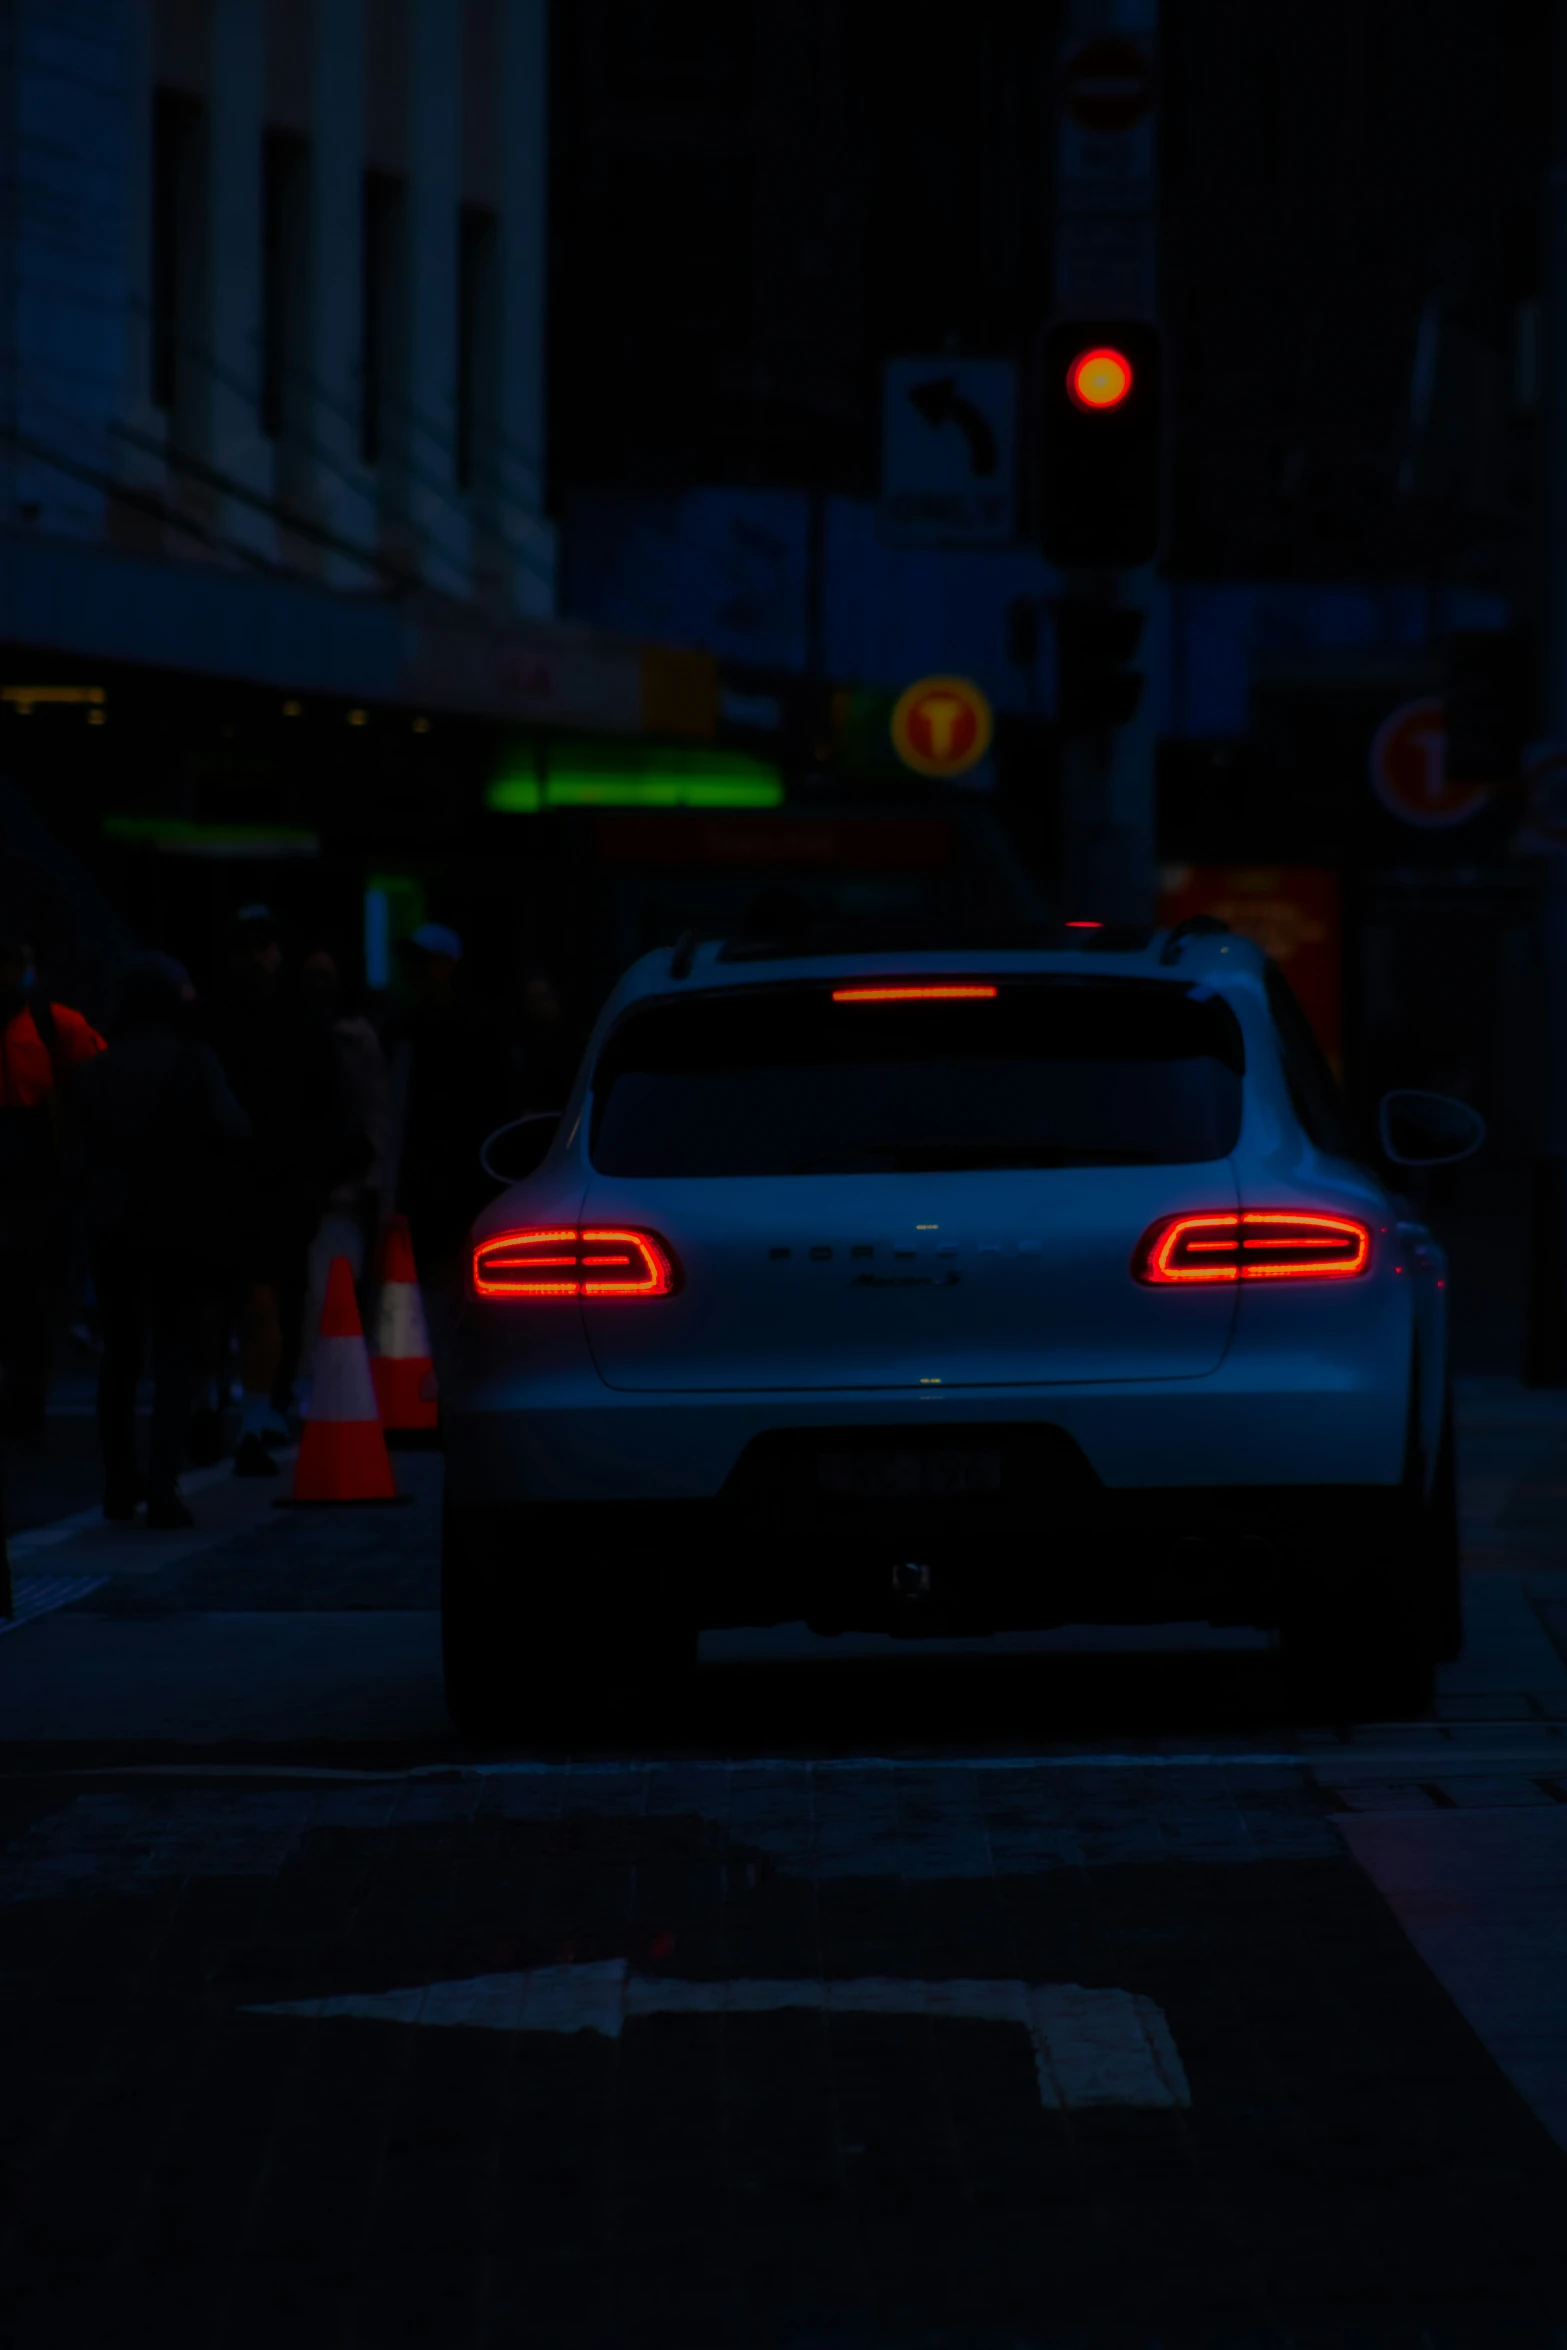 a rear view of a car on the street at night